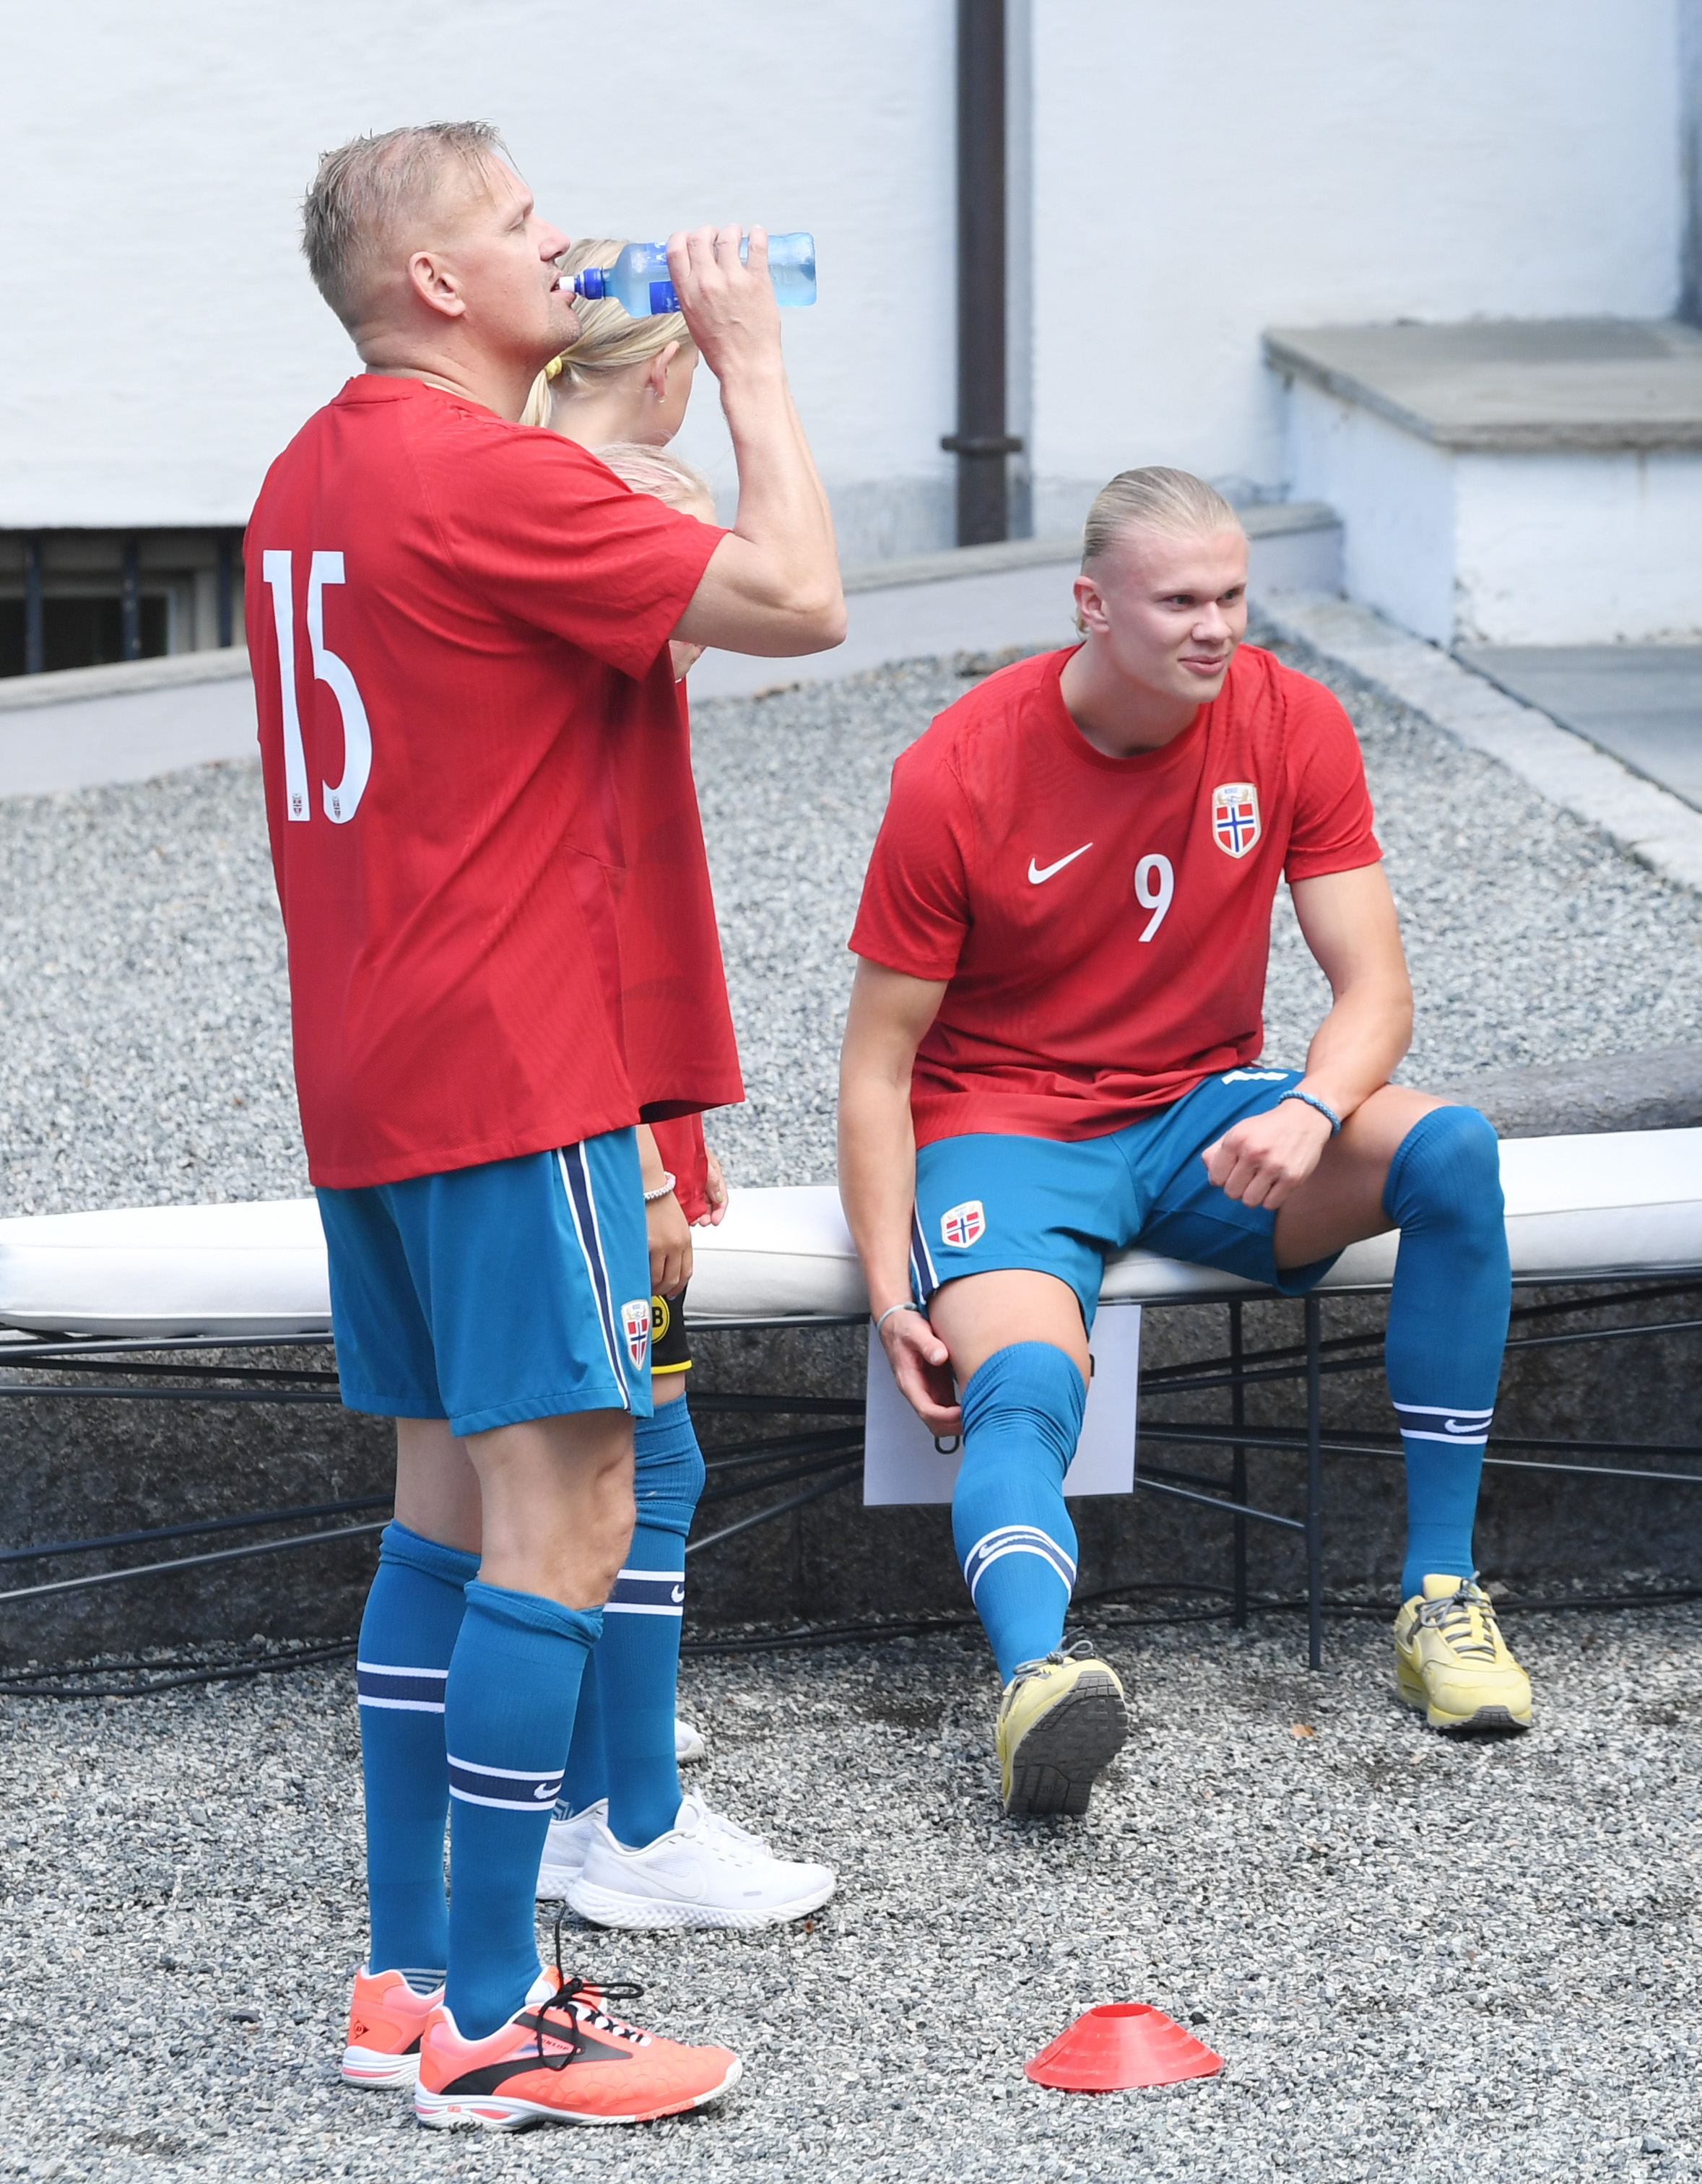 CBS Sports Golazo ⚽️ on X: "Erling Haaland and his father Alfie took part  in a friendly match against Vivil IL, a team which helps provide sporting  opportunities for people with disabilities.